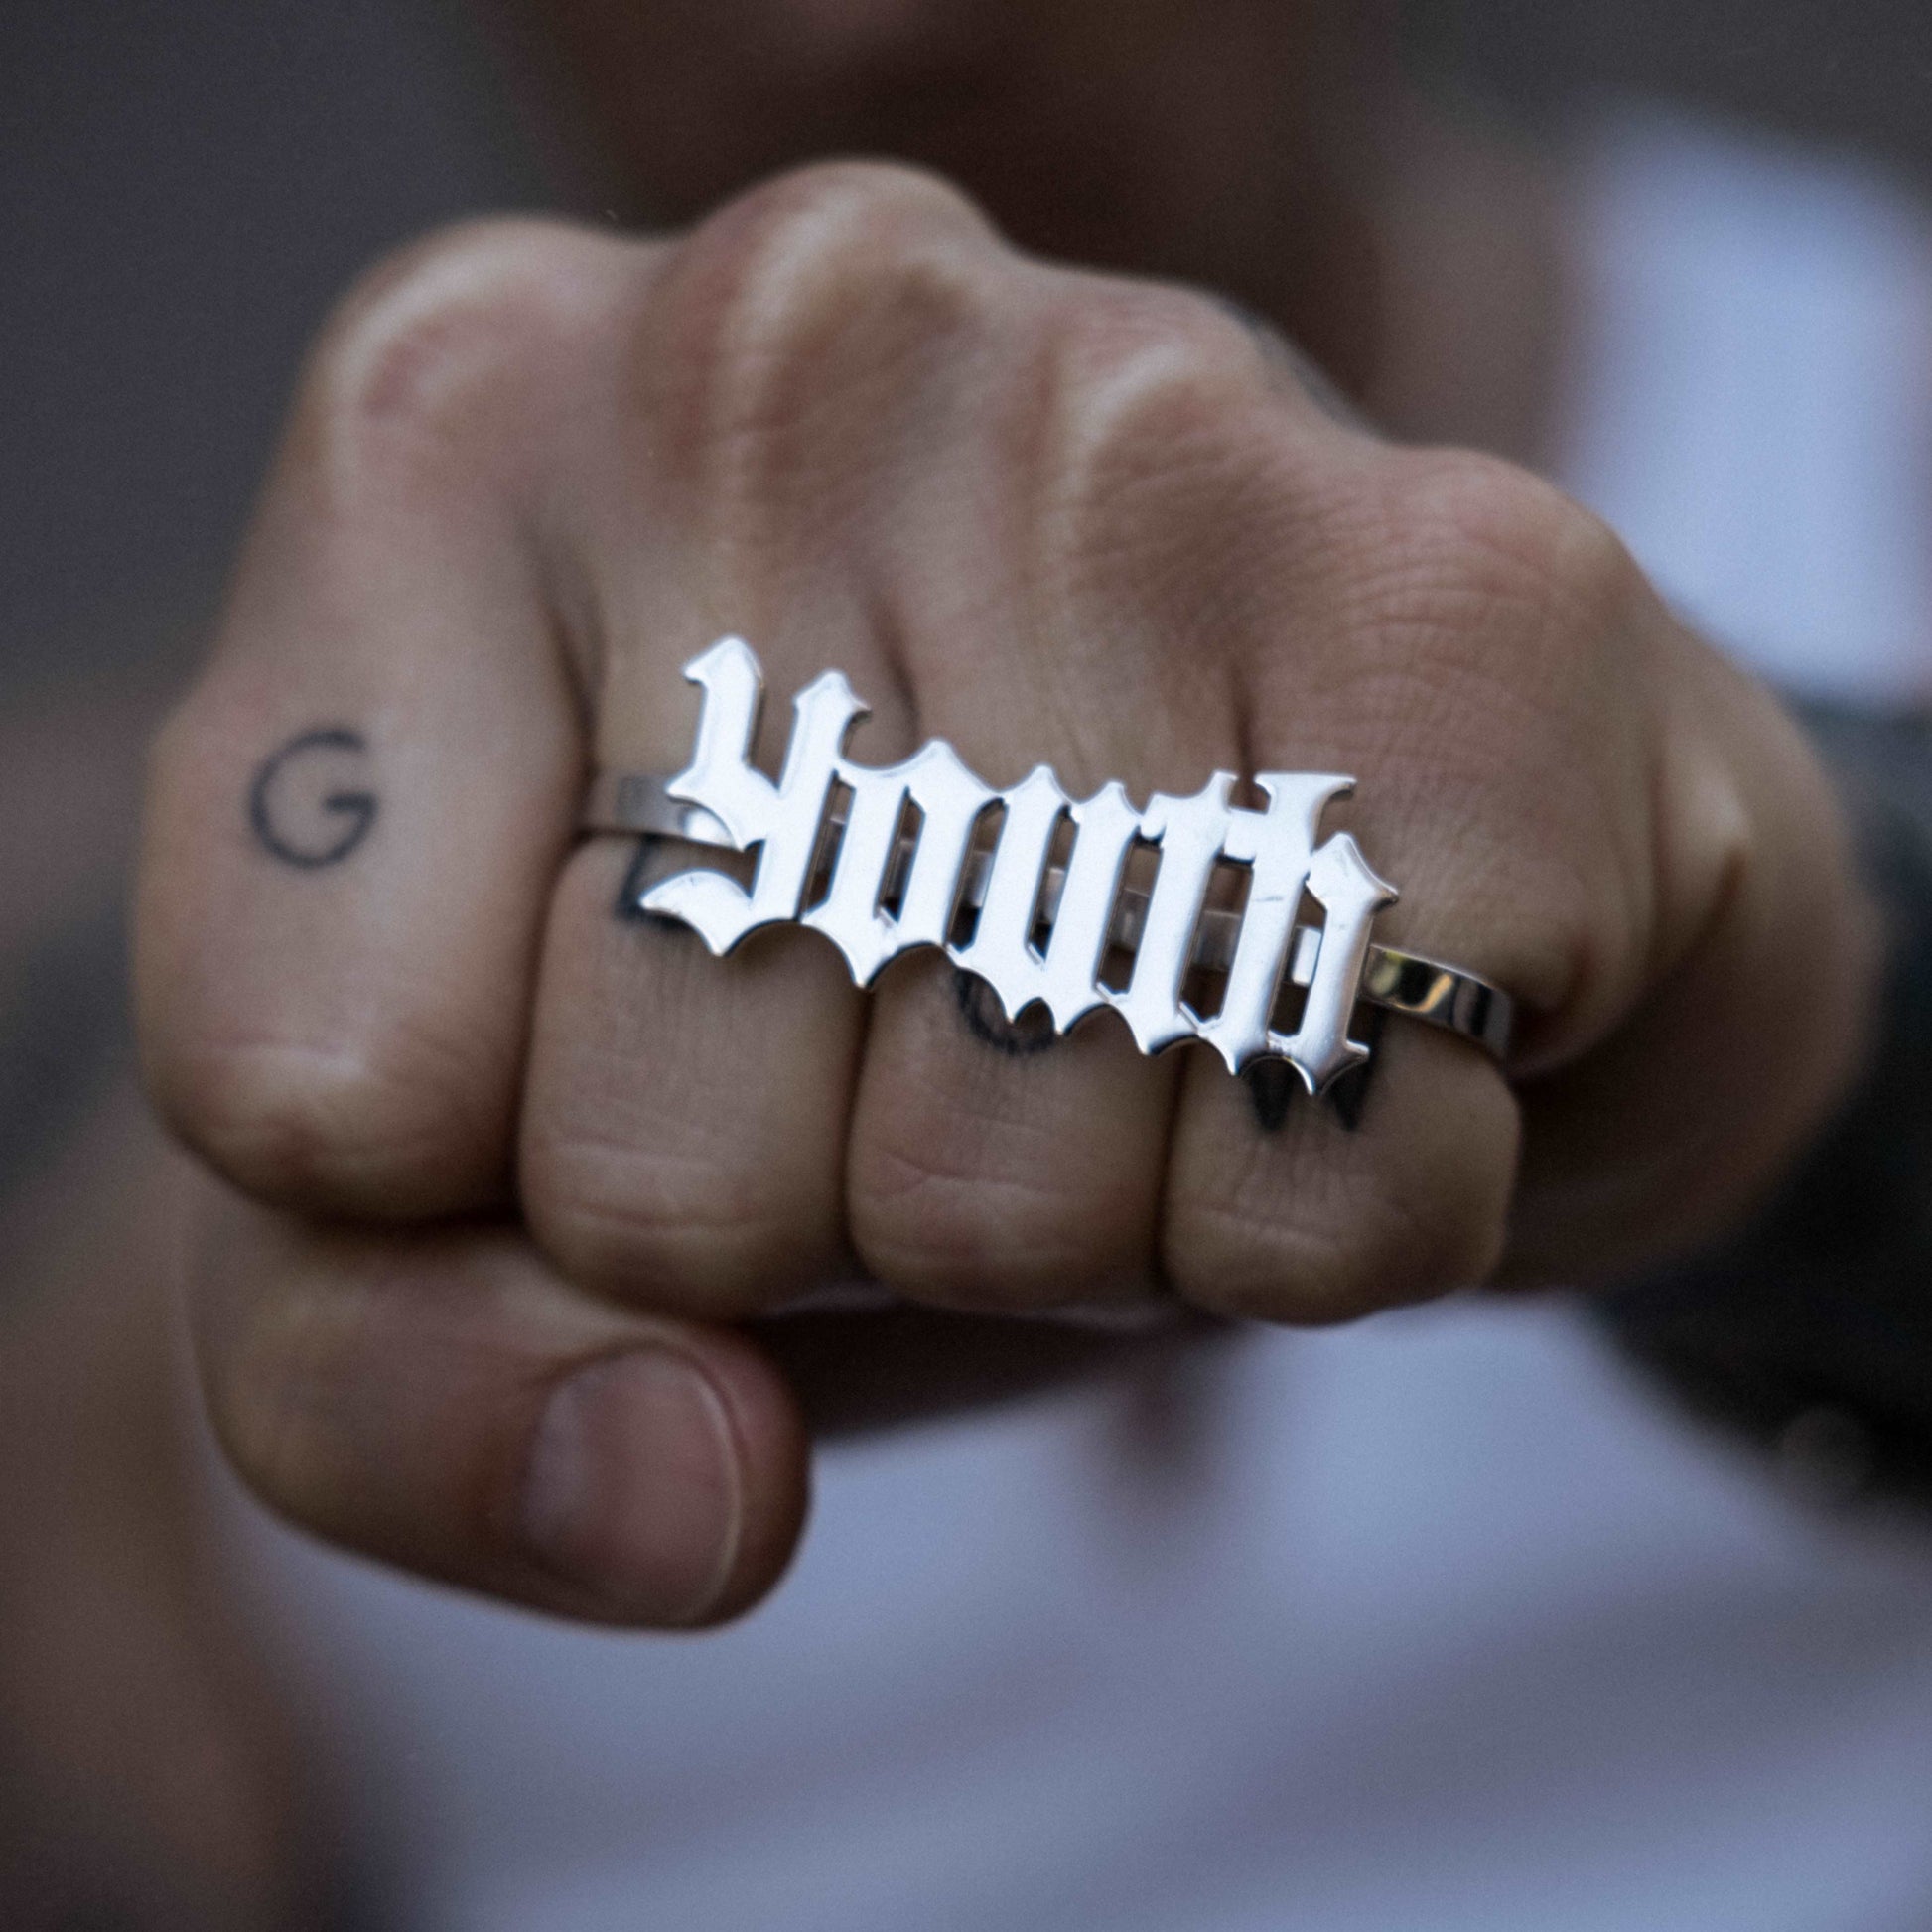 THREE FINGERS RING "YOUTH" / SILVER